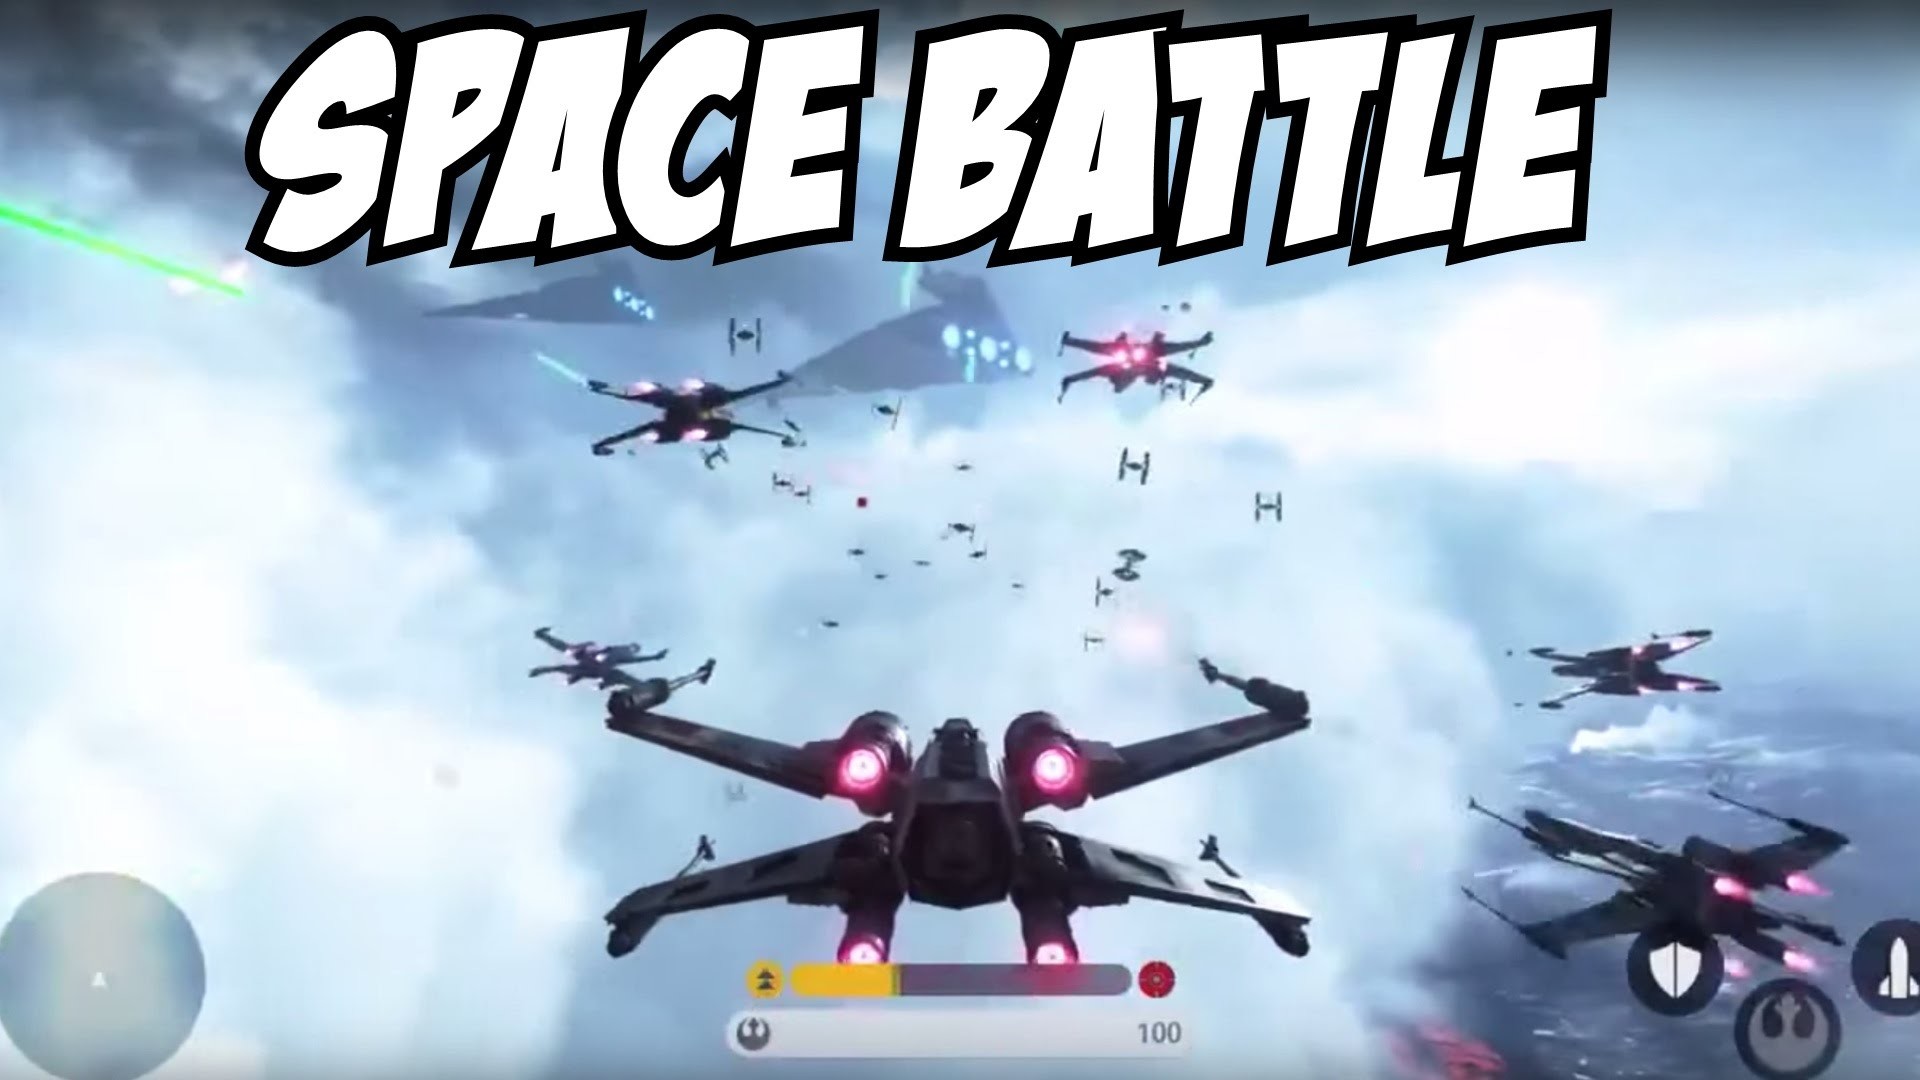 1920x1080 Star Wars Battlefront 3 Gameplay Fighter Squadron Mode Space Battle?  Trailer PS4 Xbox One PC - YouTube